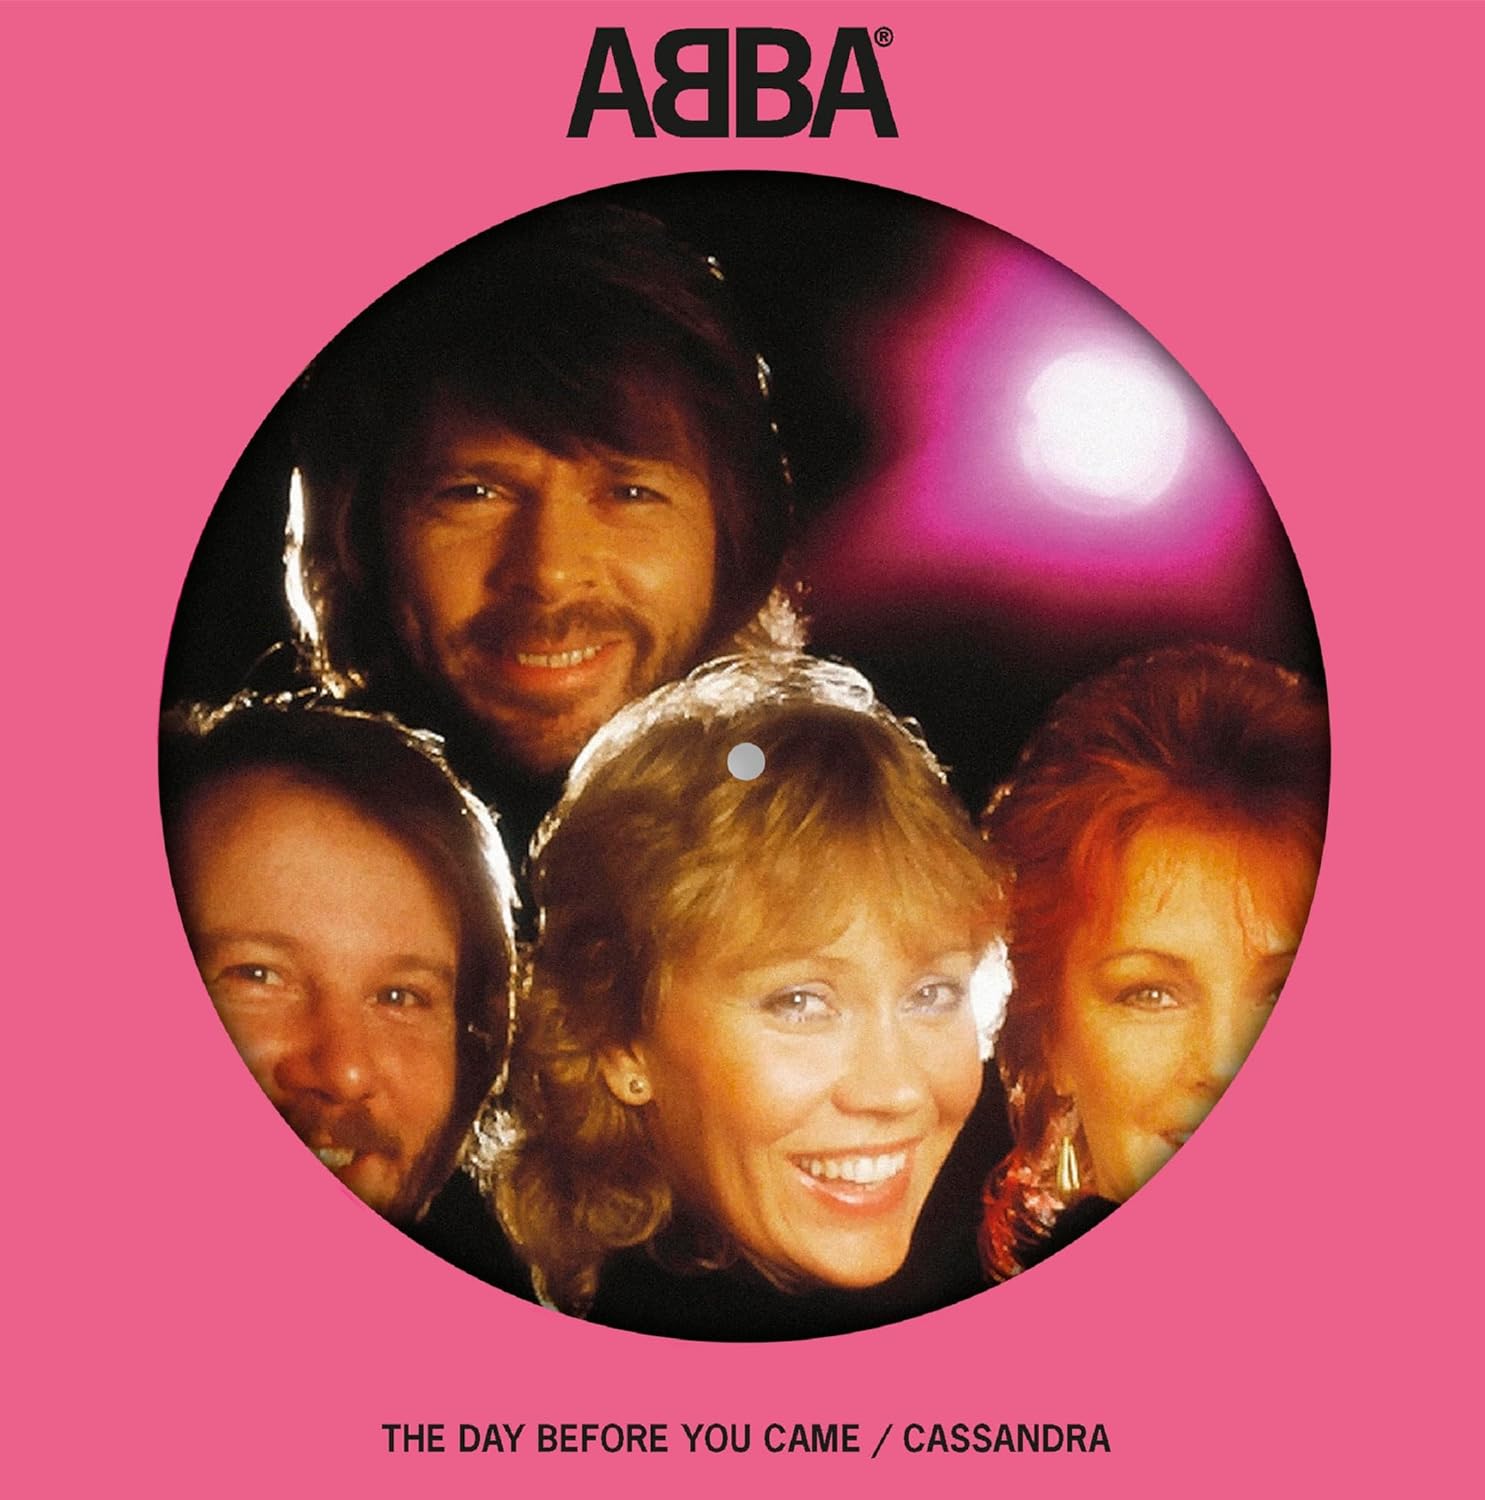 The Day Before You Came / Cassandra (Picture Vinyl, 7" 45 RPM) | ABBA